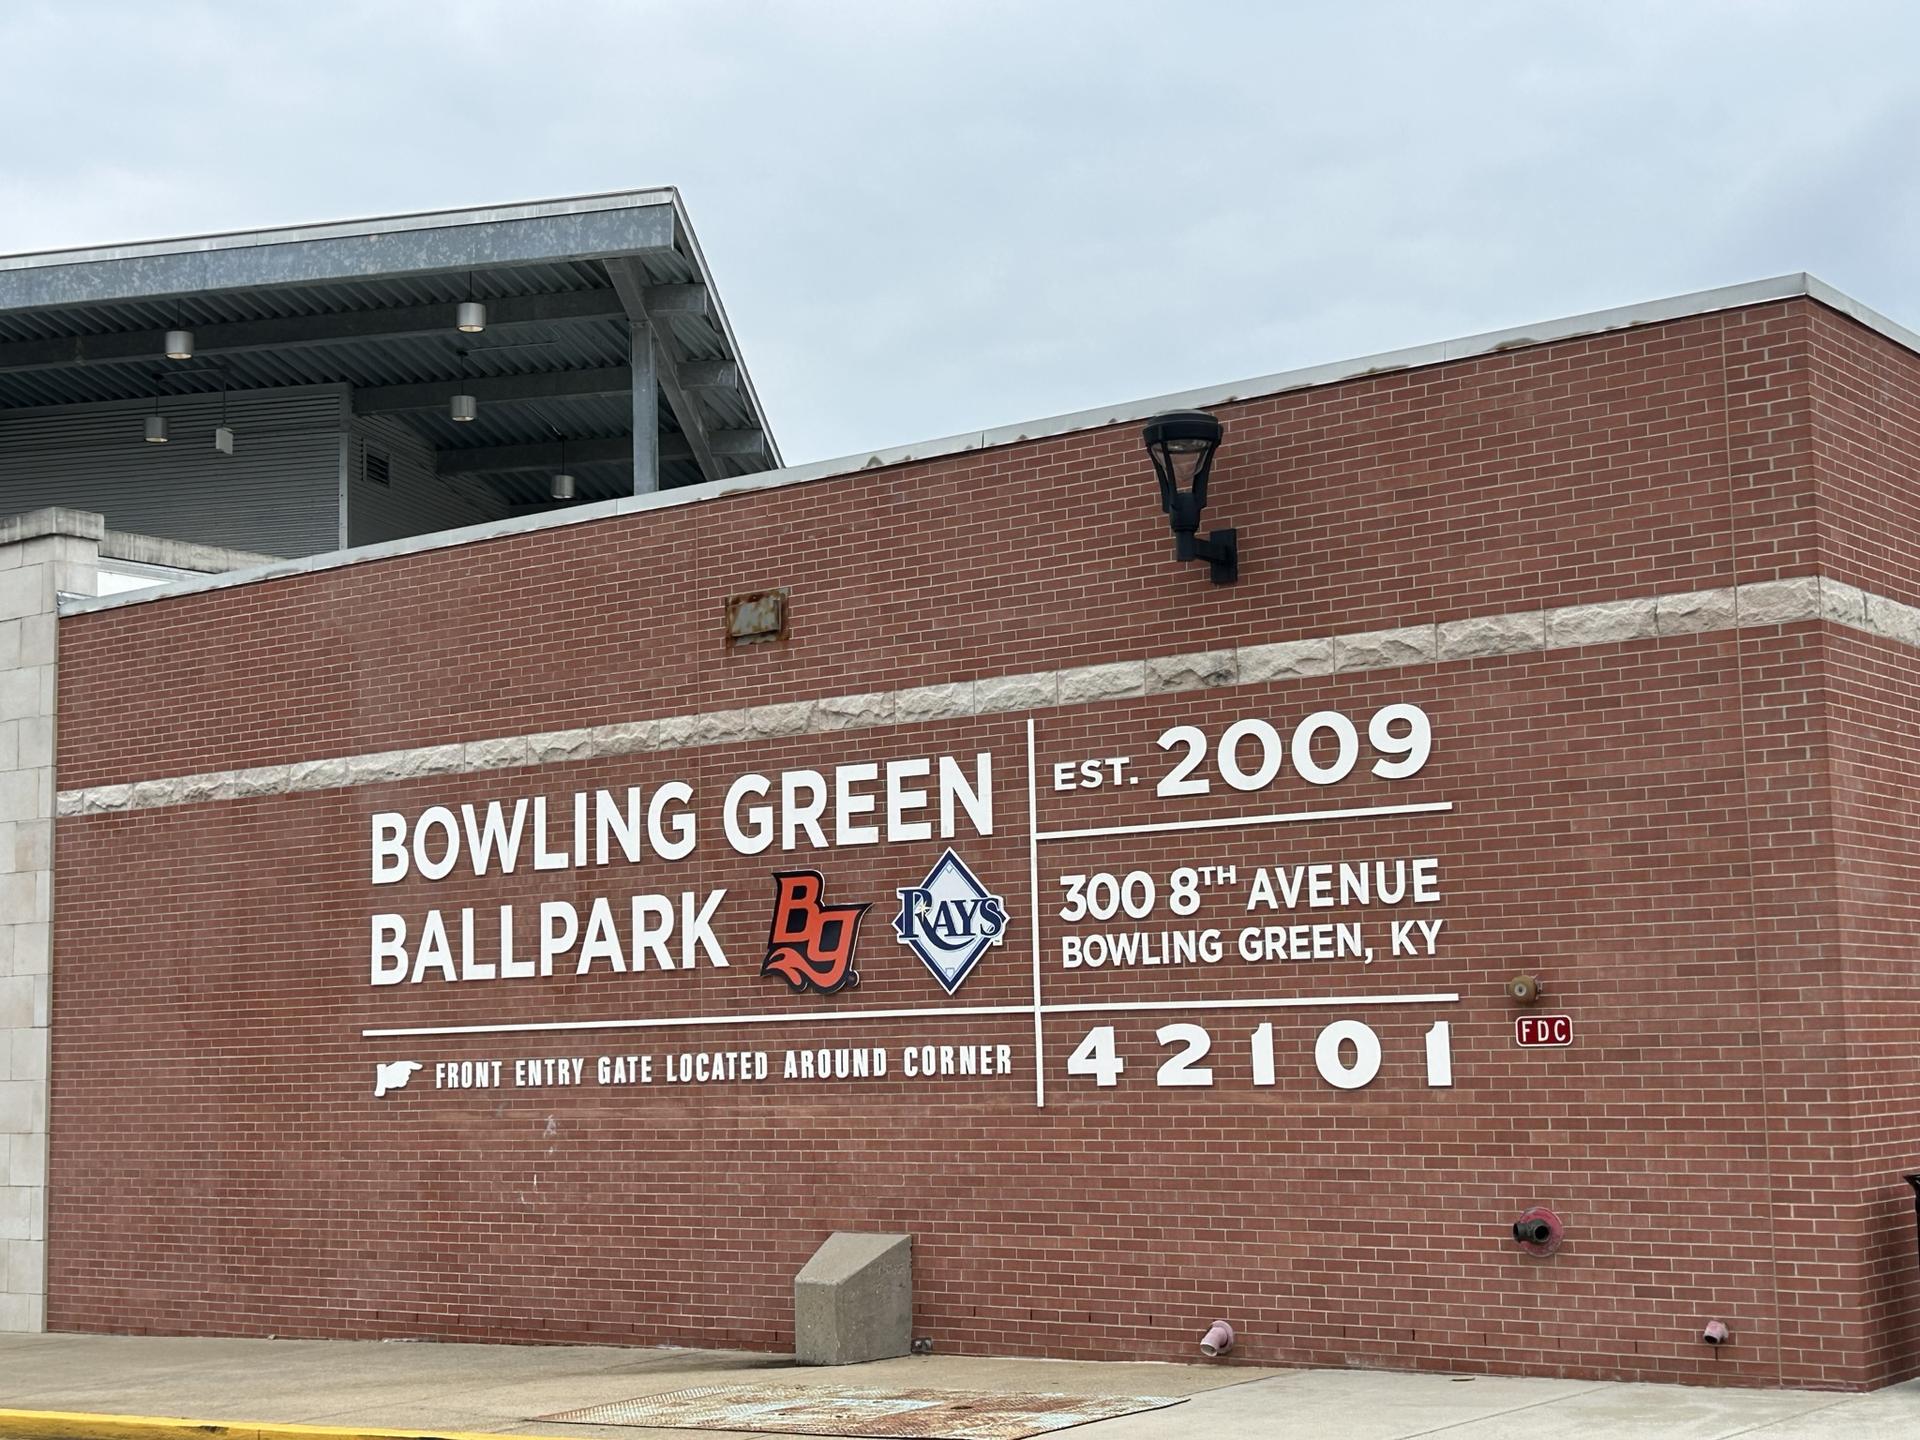 Bowling Green Ballpark from the outside